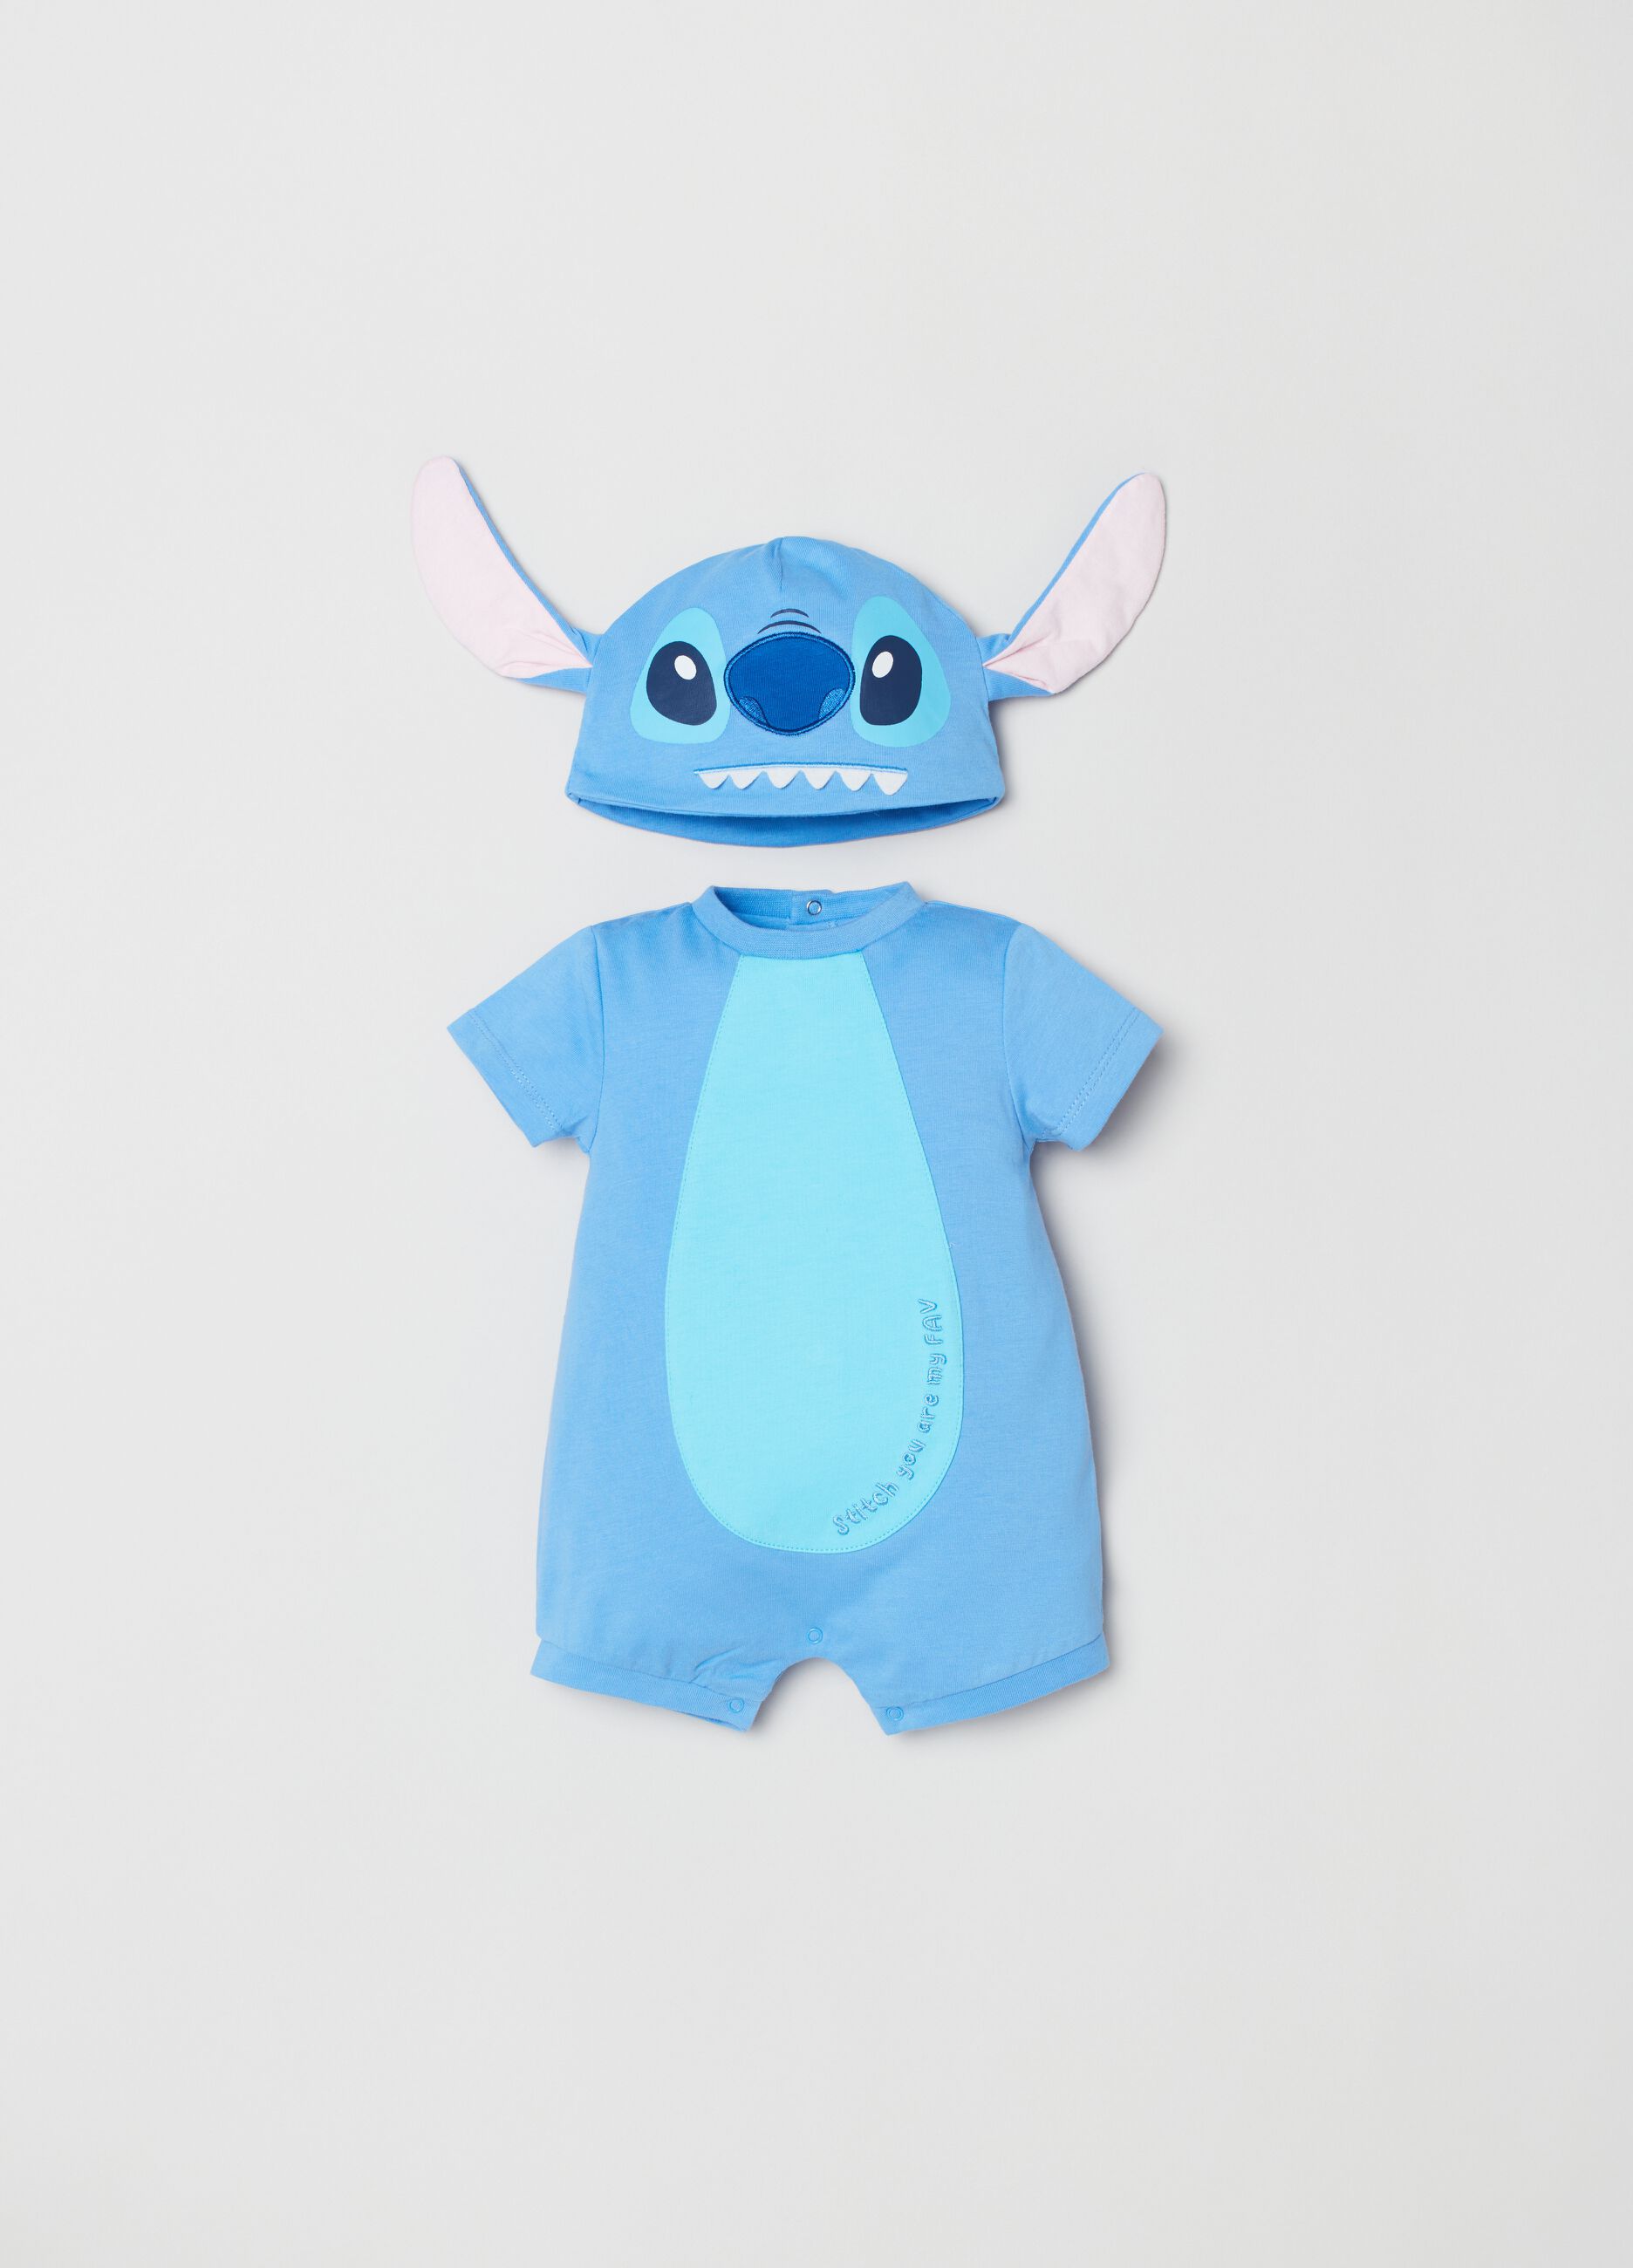 Stitch romper suit and hat with ears set